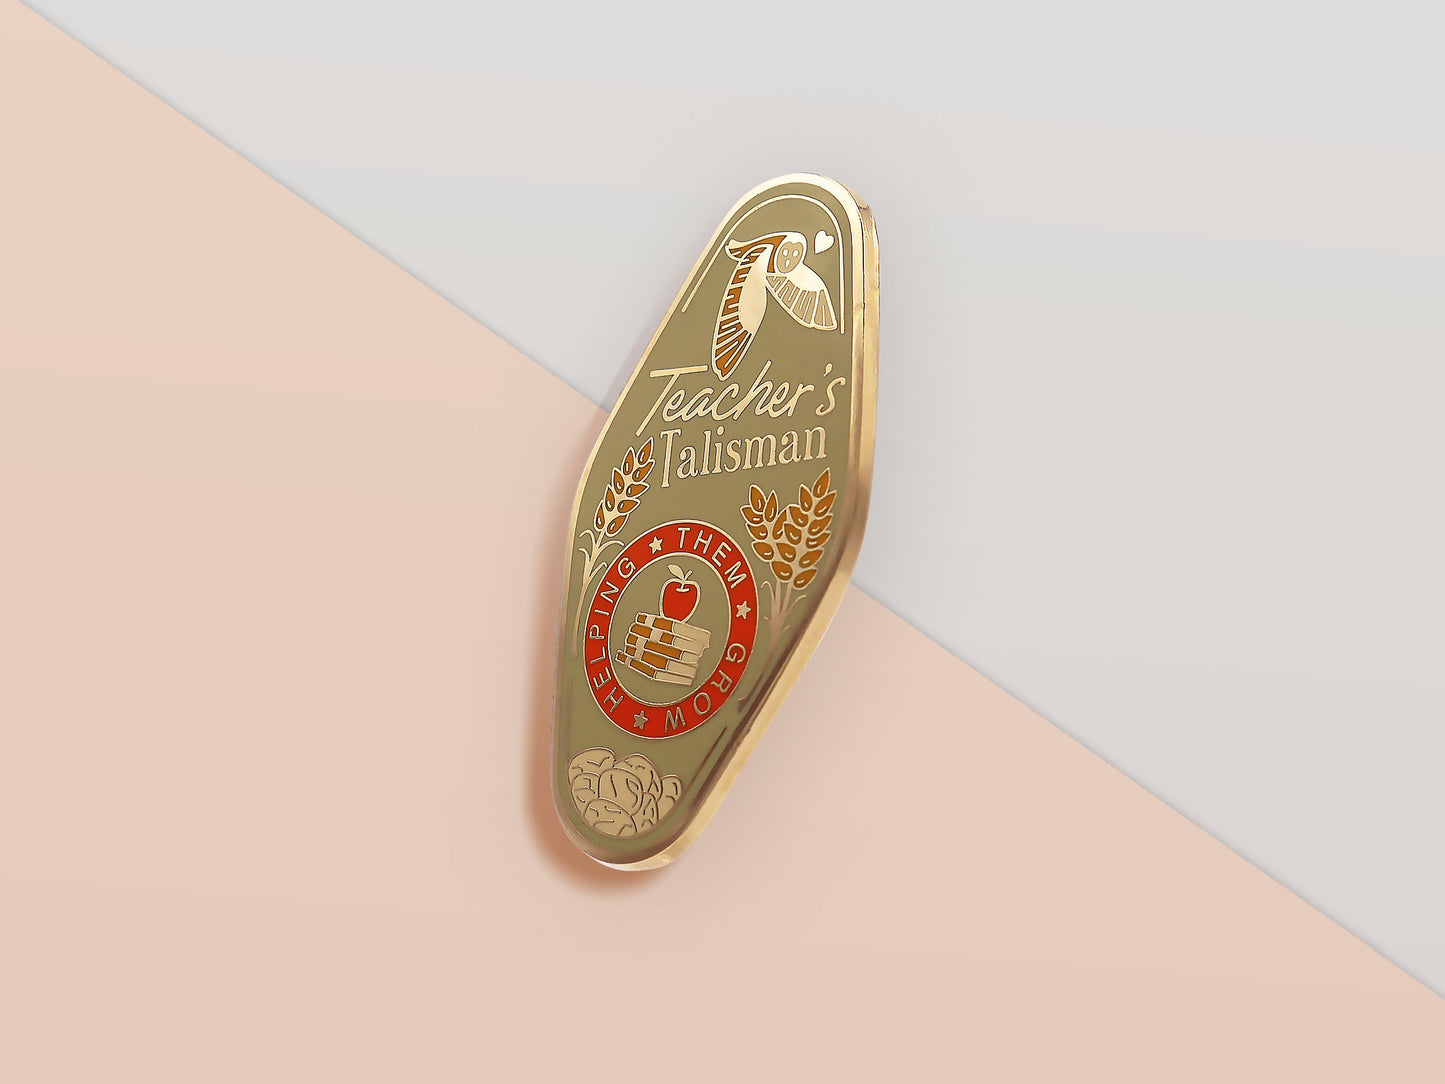 Gold Enamel Talisman Pin with green design and the words Teacher's Talisman, Helping Them Grow. The pins design includes a stack of books and an apple, a barn owl, as well as plants, flowers and crystals.